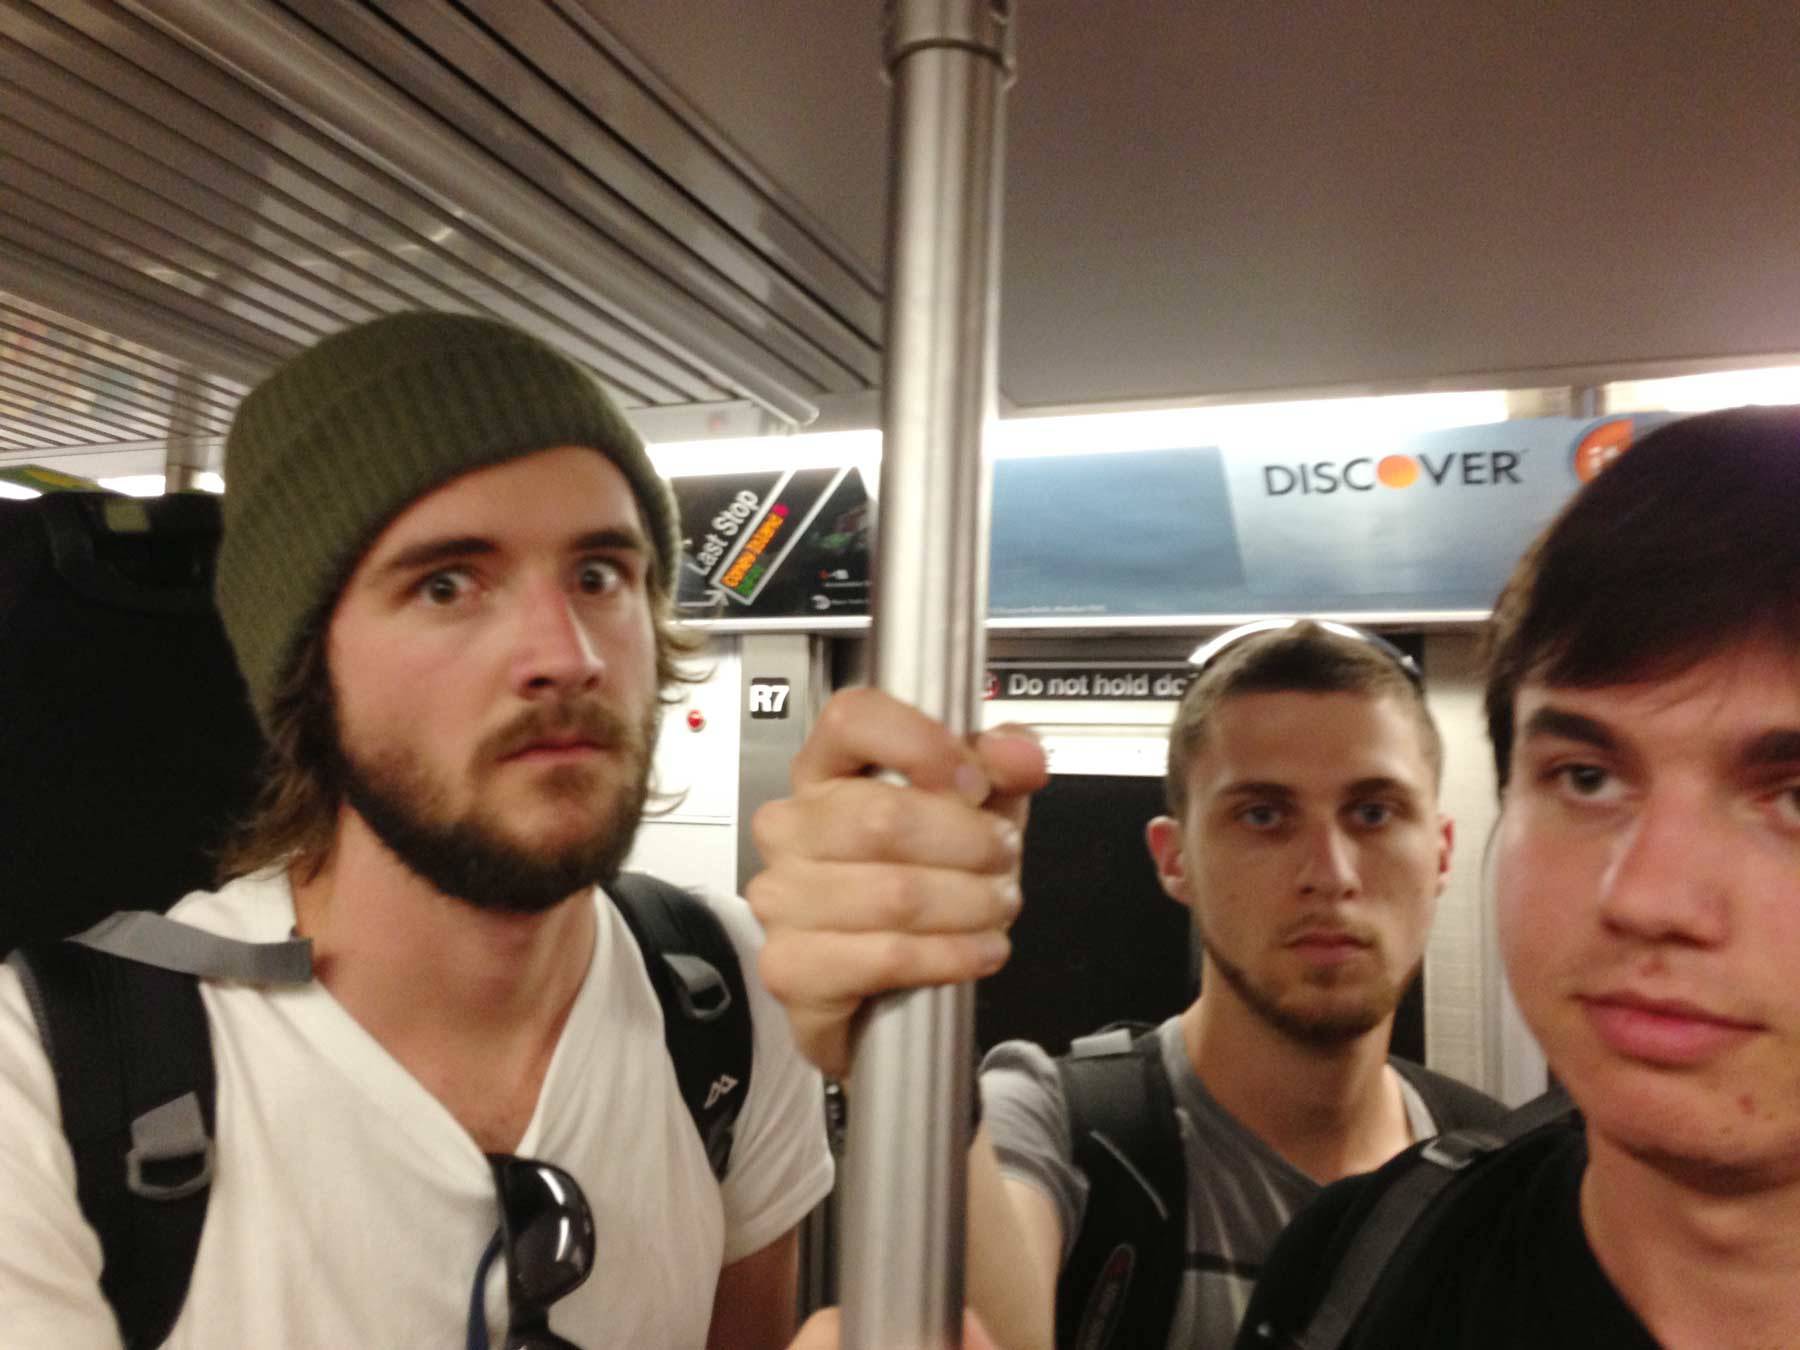 Butcher, Irwin, and Andrew on the train